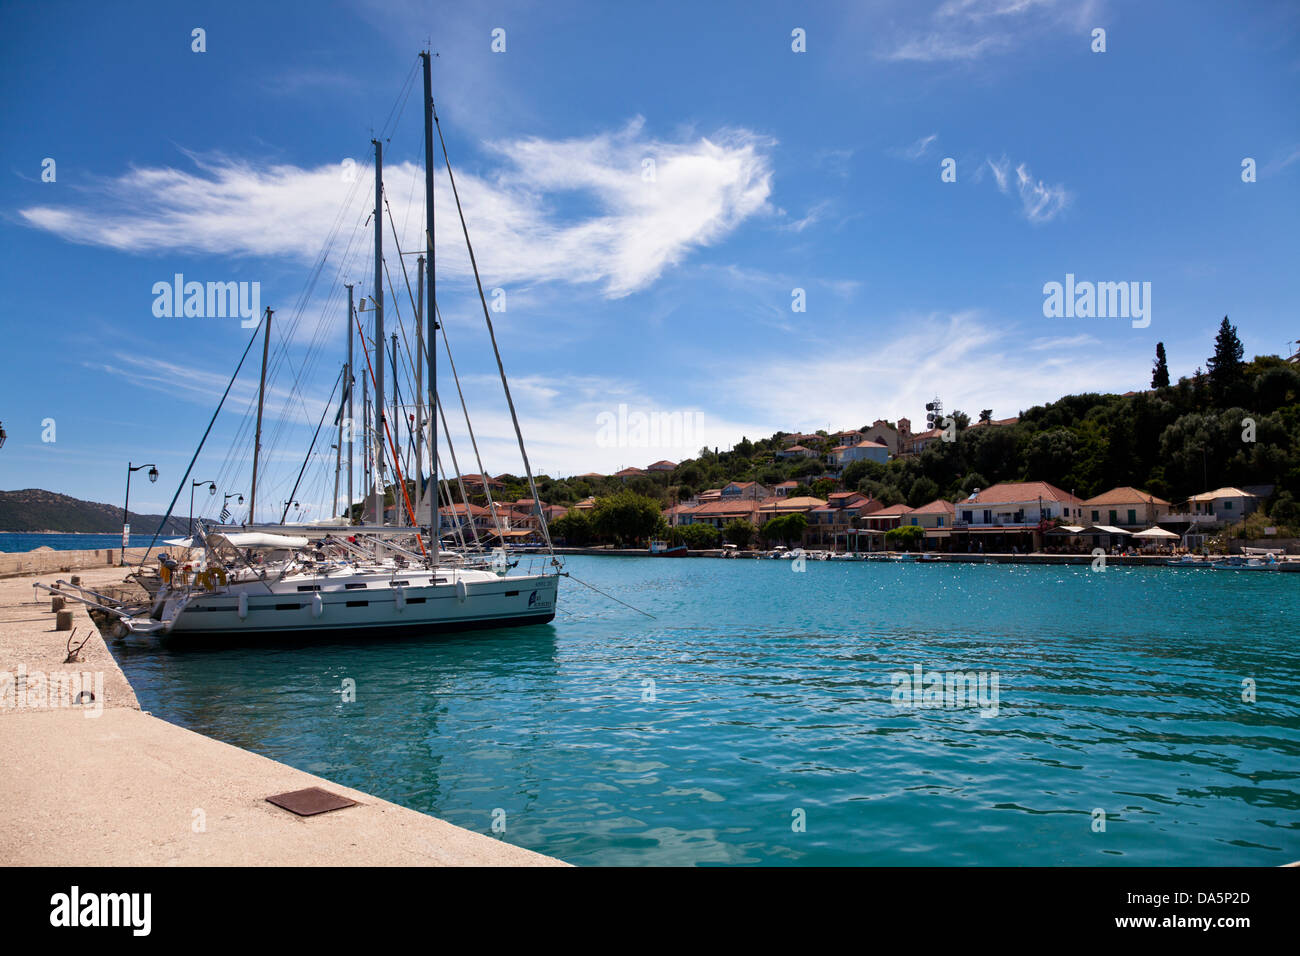 Yachts moored in the harbour at Kalamos, Greece Stock Photo